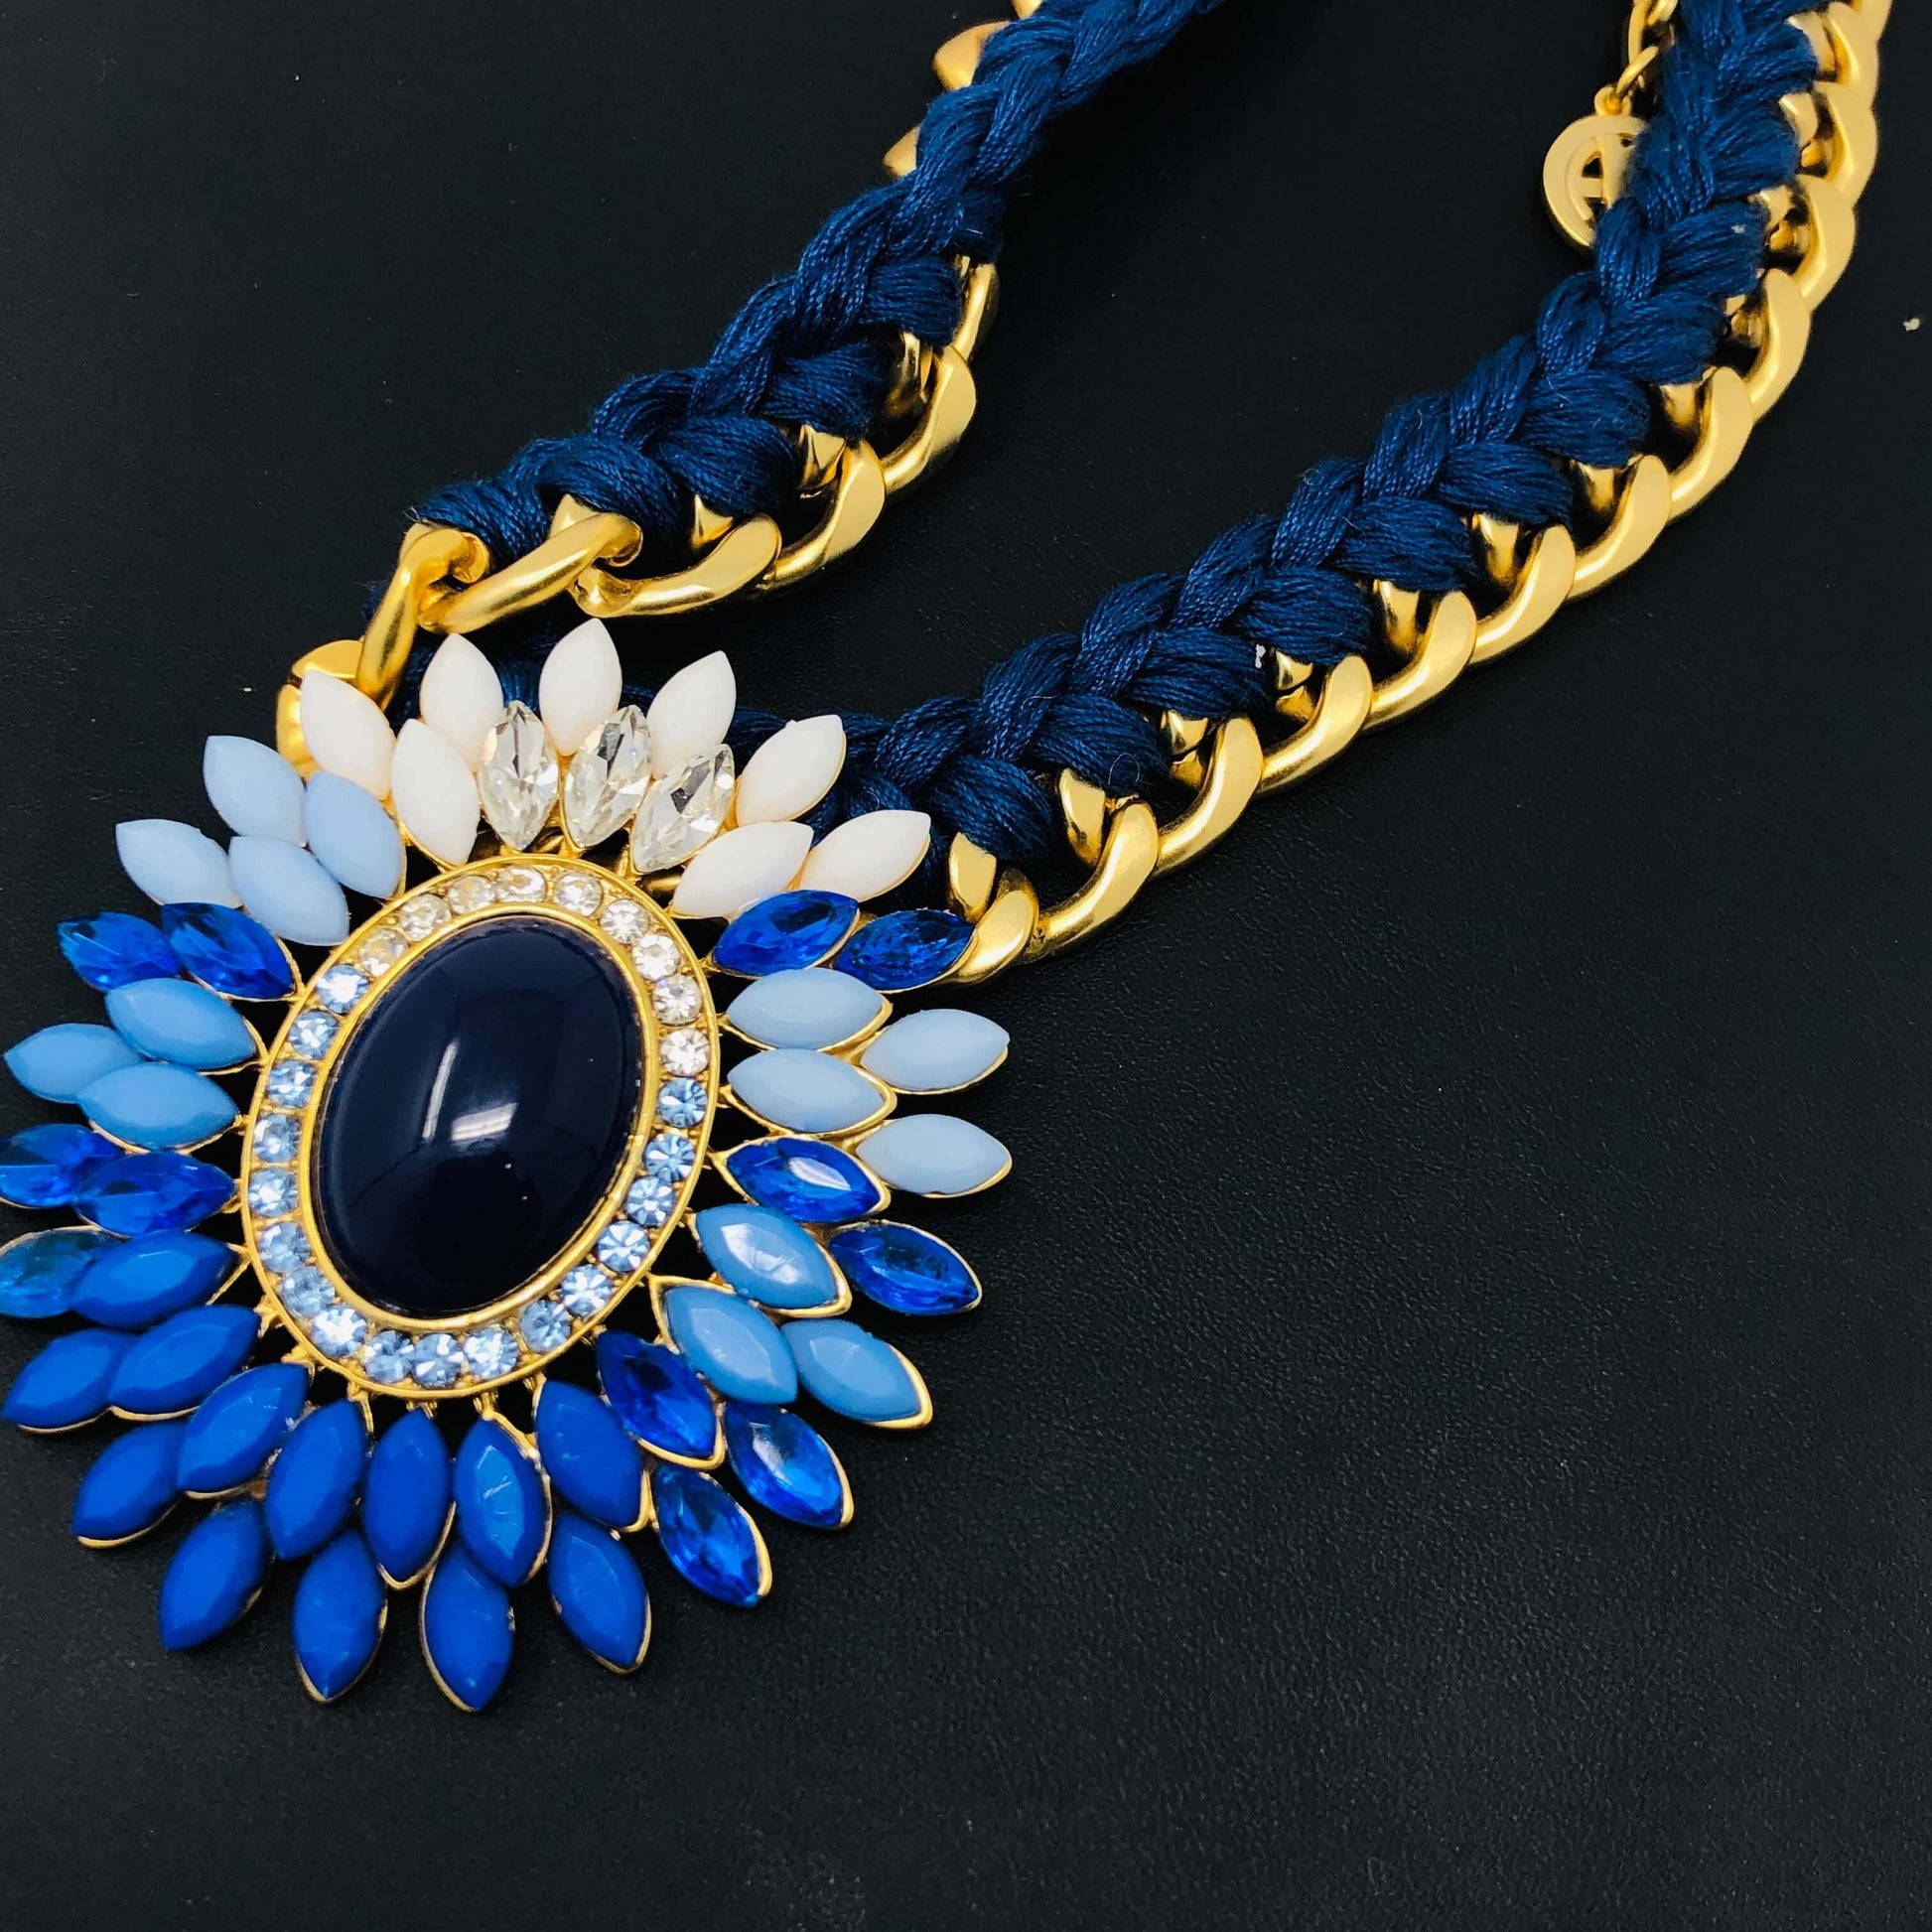 Blue and Gold Flower Pendant Necklace - Rofial Beauty